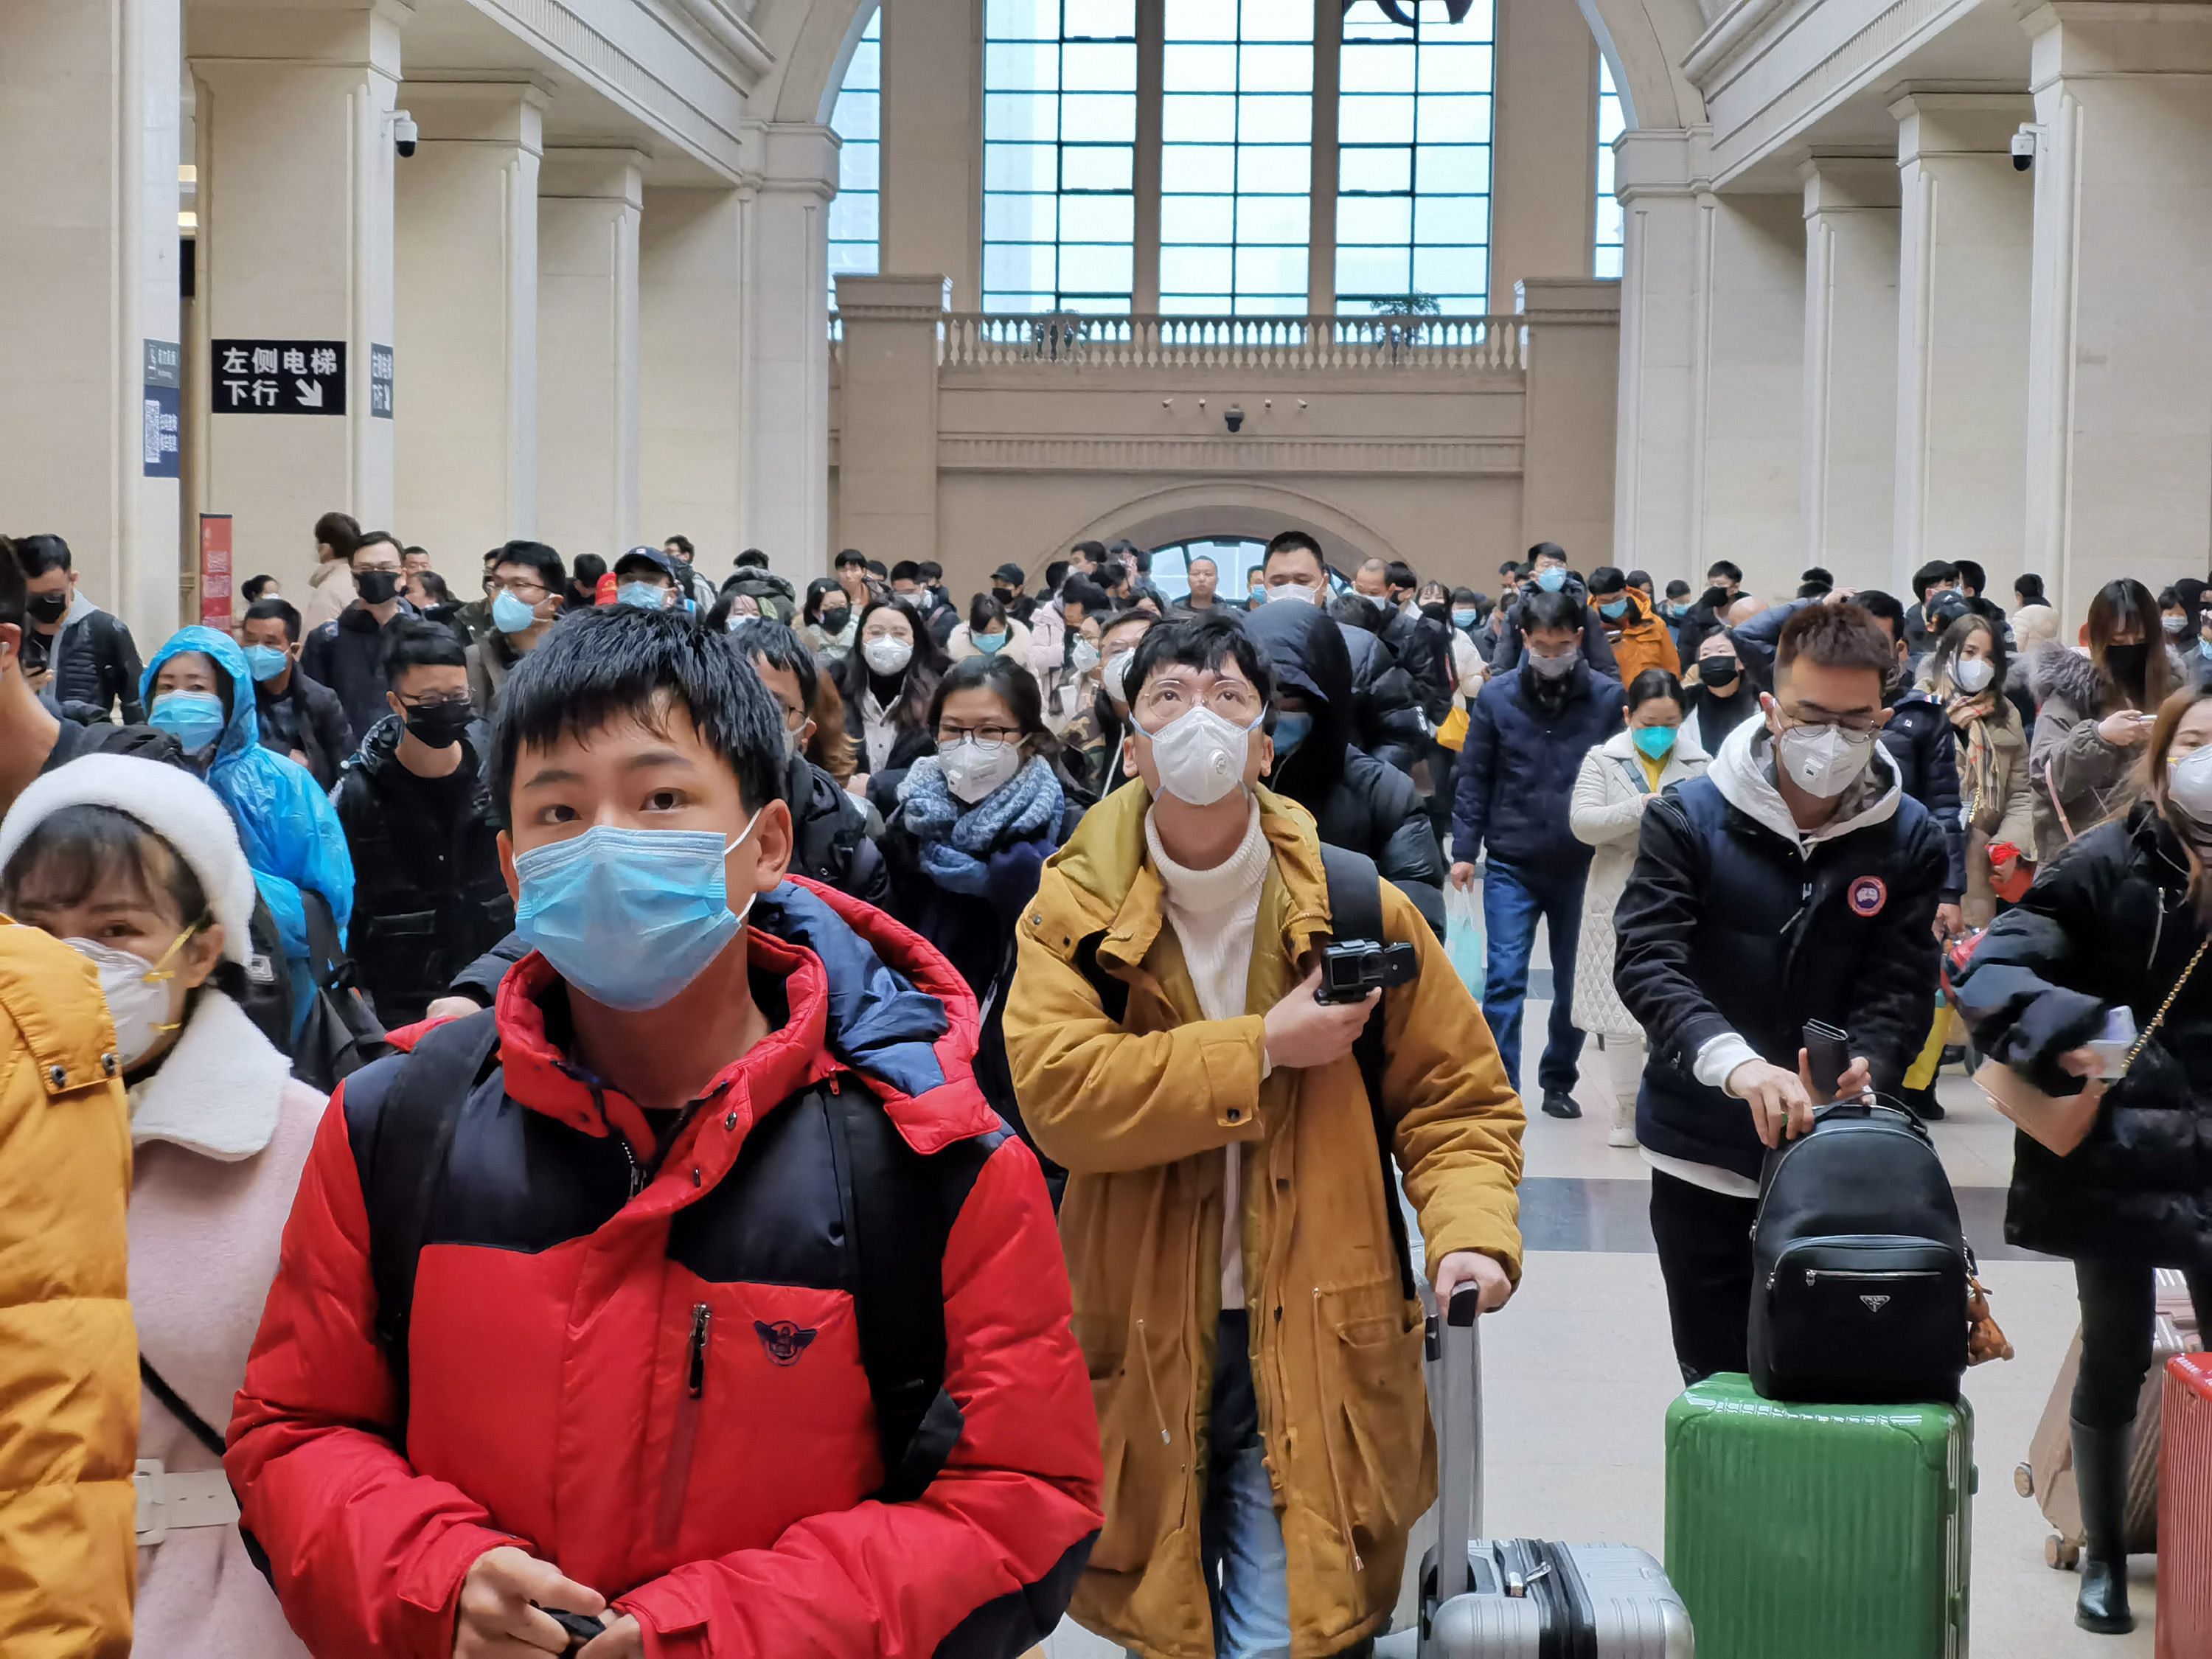 China’s government imposed a quarantine on Wuhan and more than a dozen other cities in the region, a travel ban covering in excess of 50 million people. Credit: Bloomberg